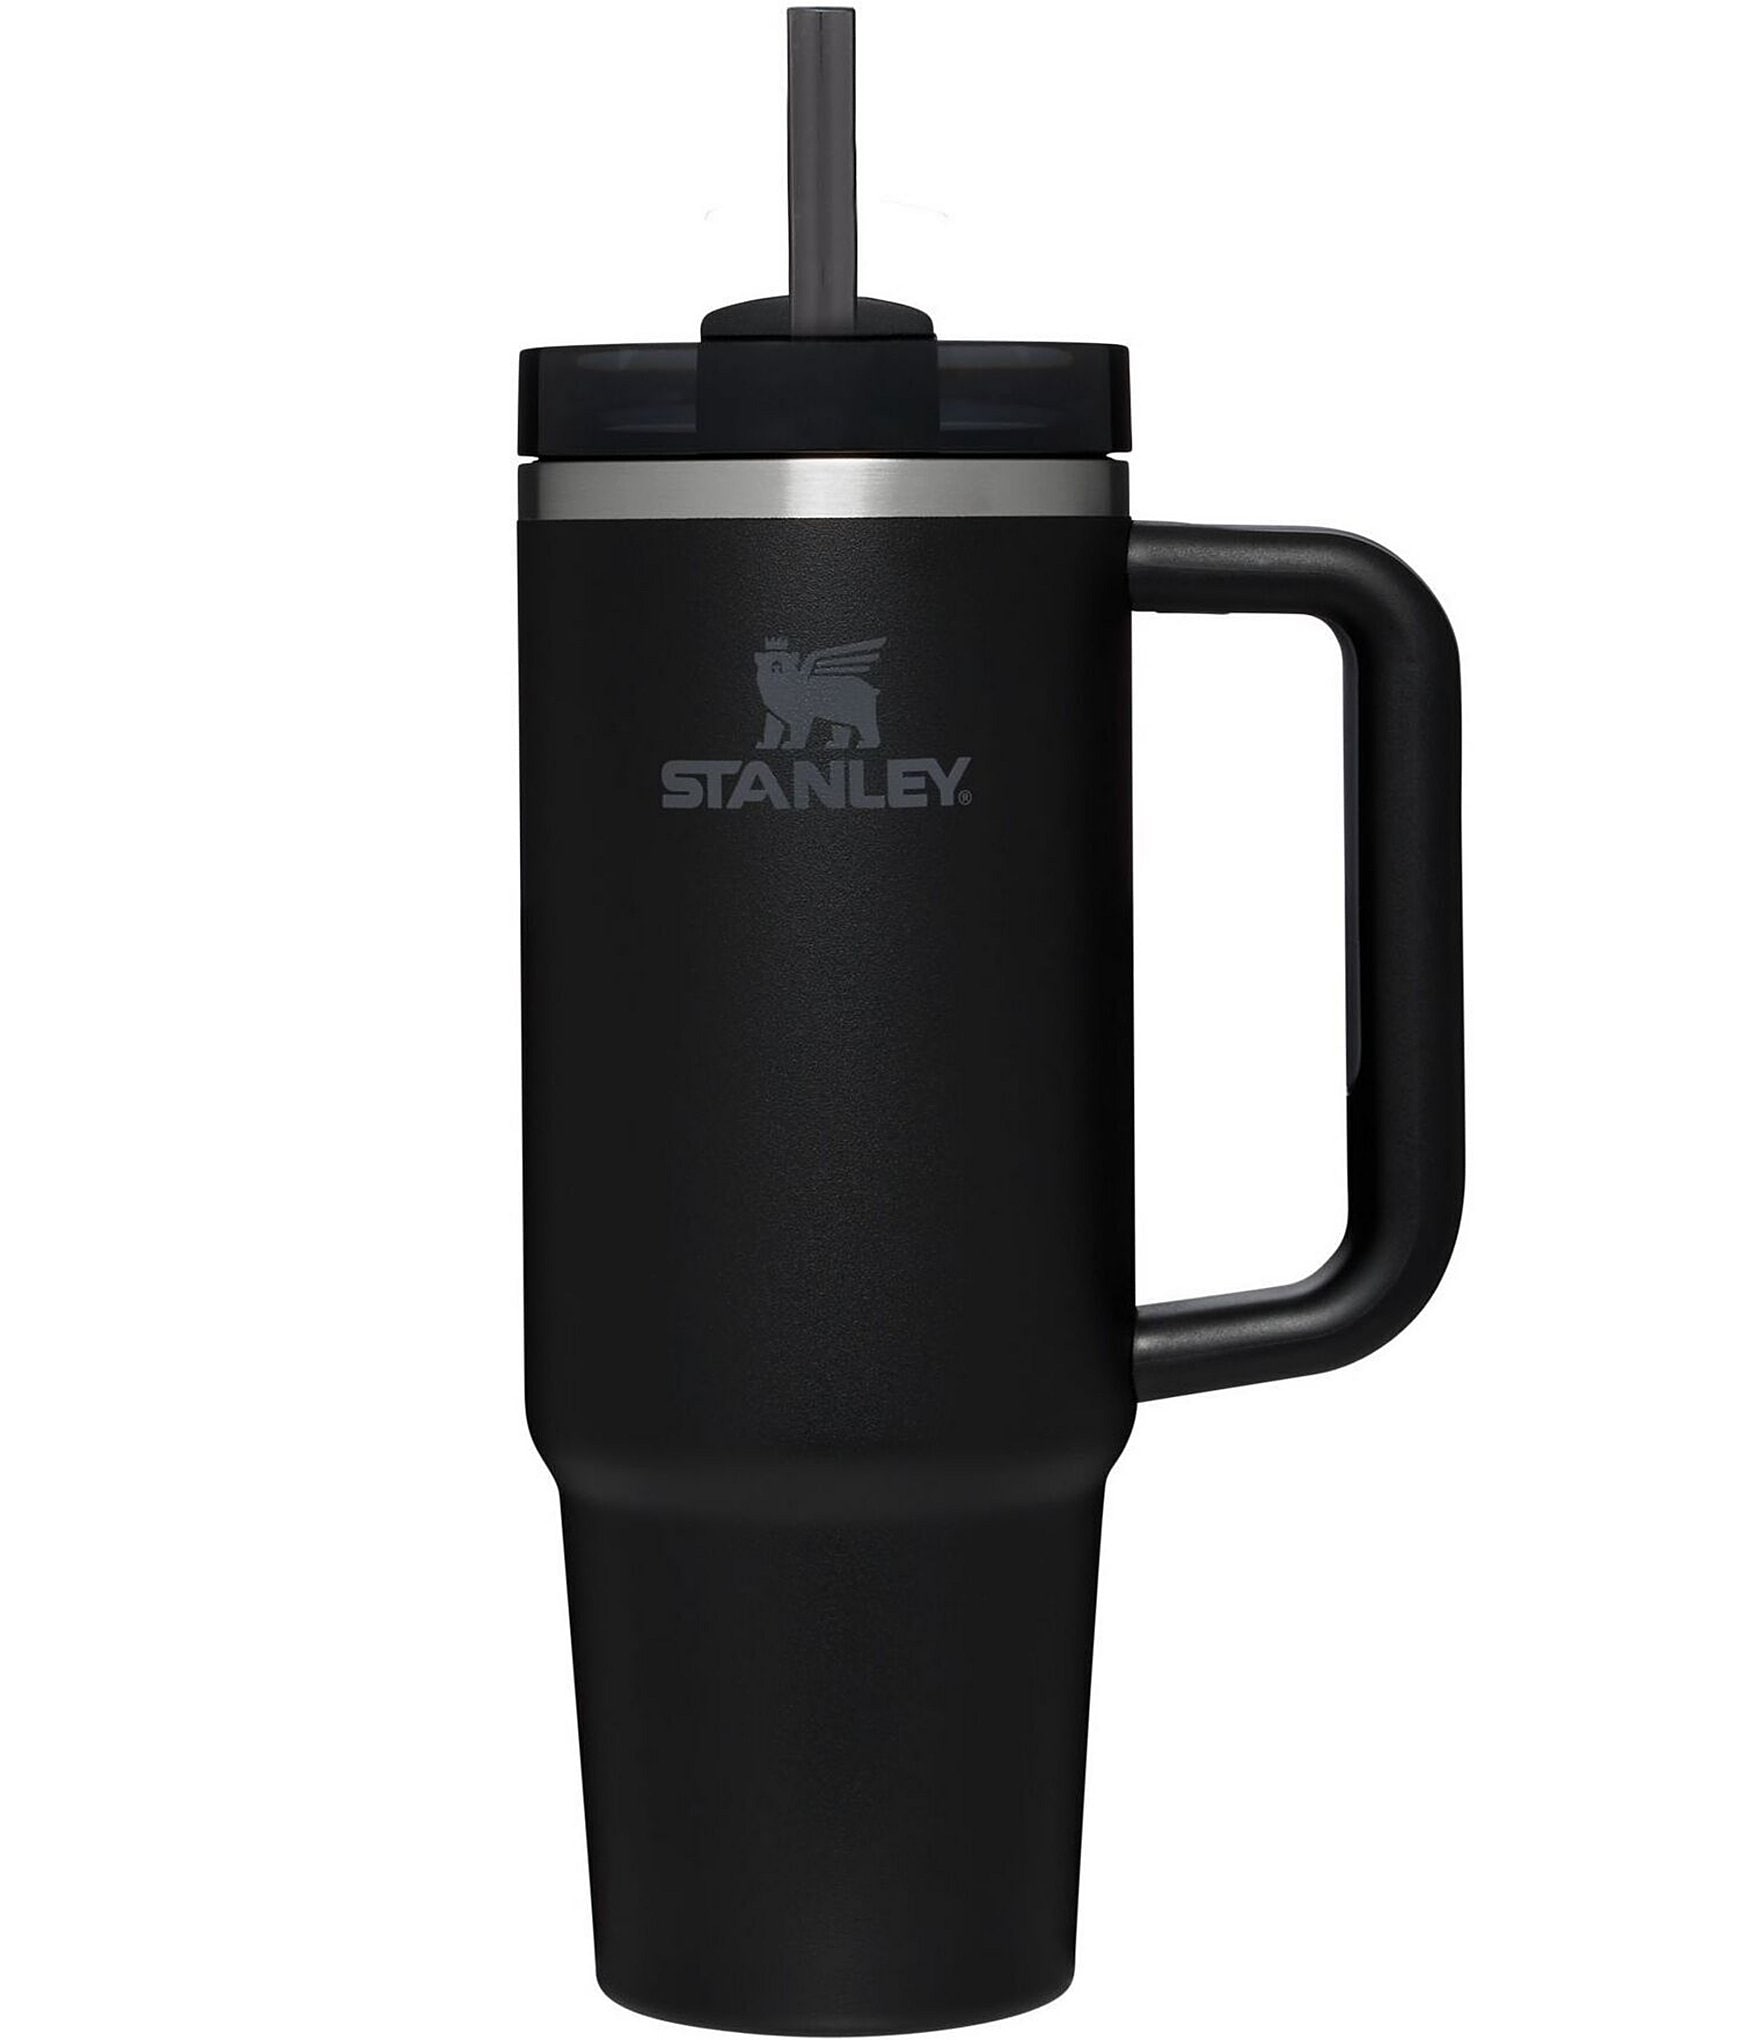 Does the Stanley Quencher tumbler fit in your car cup holder